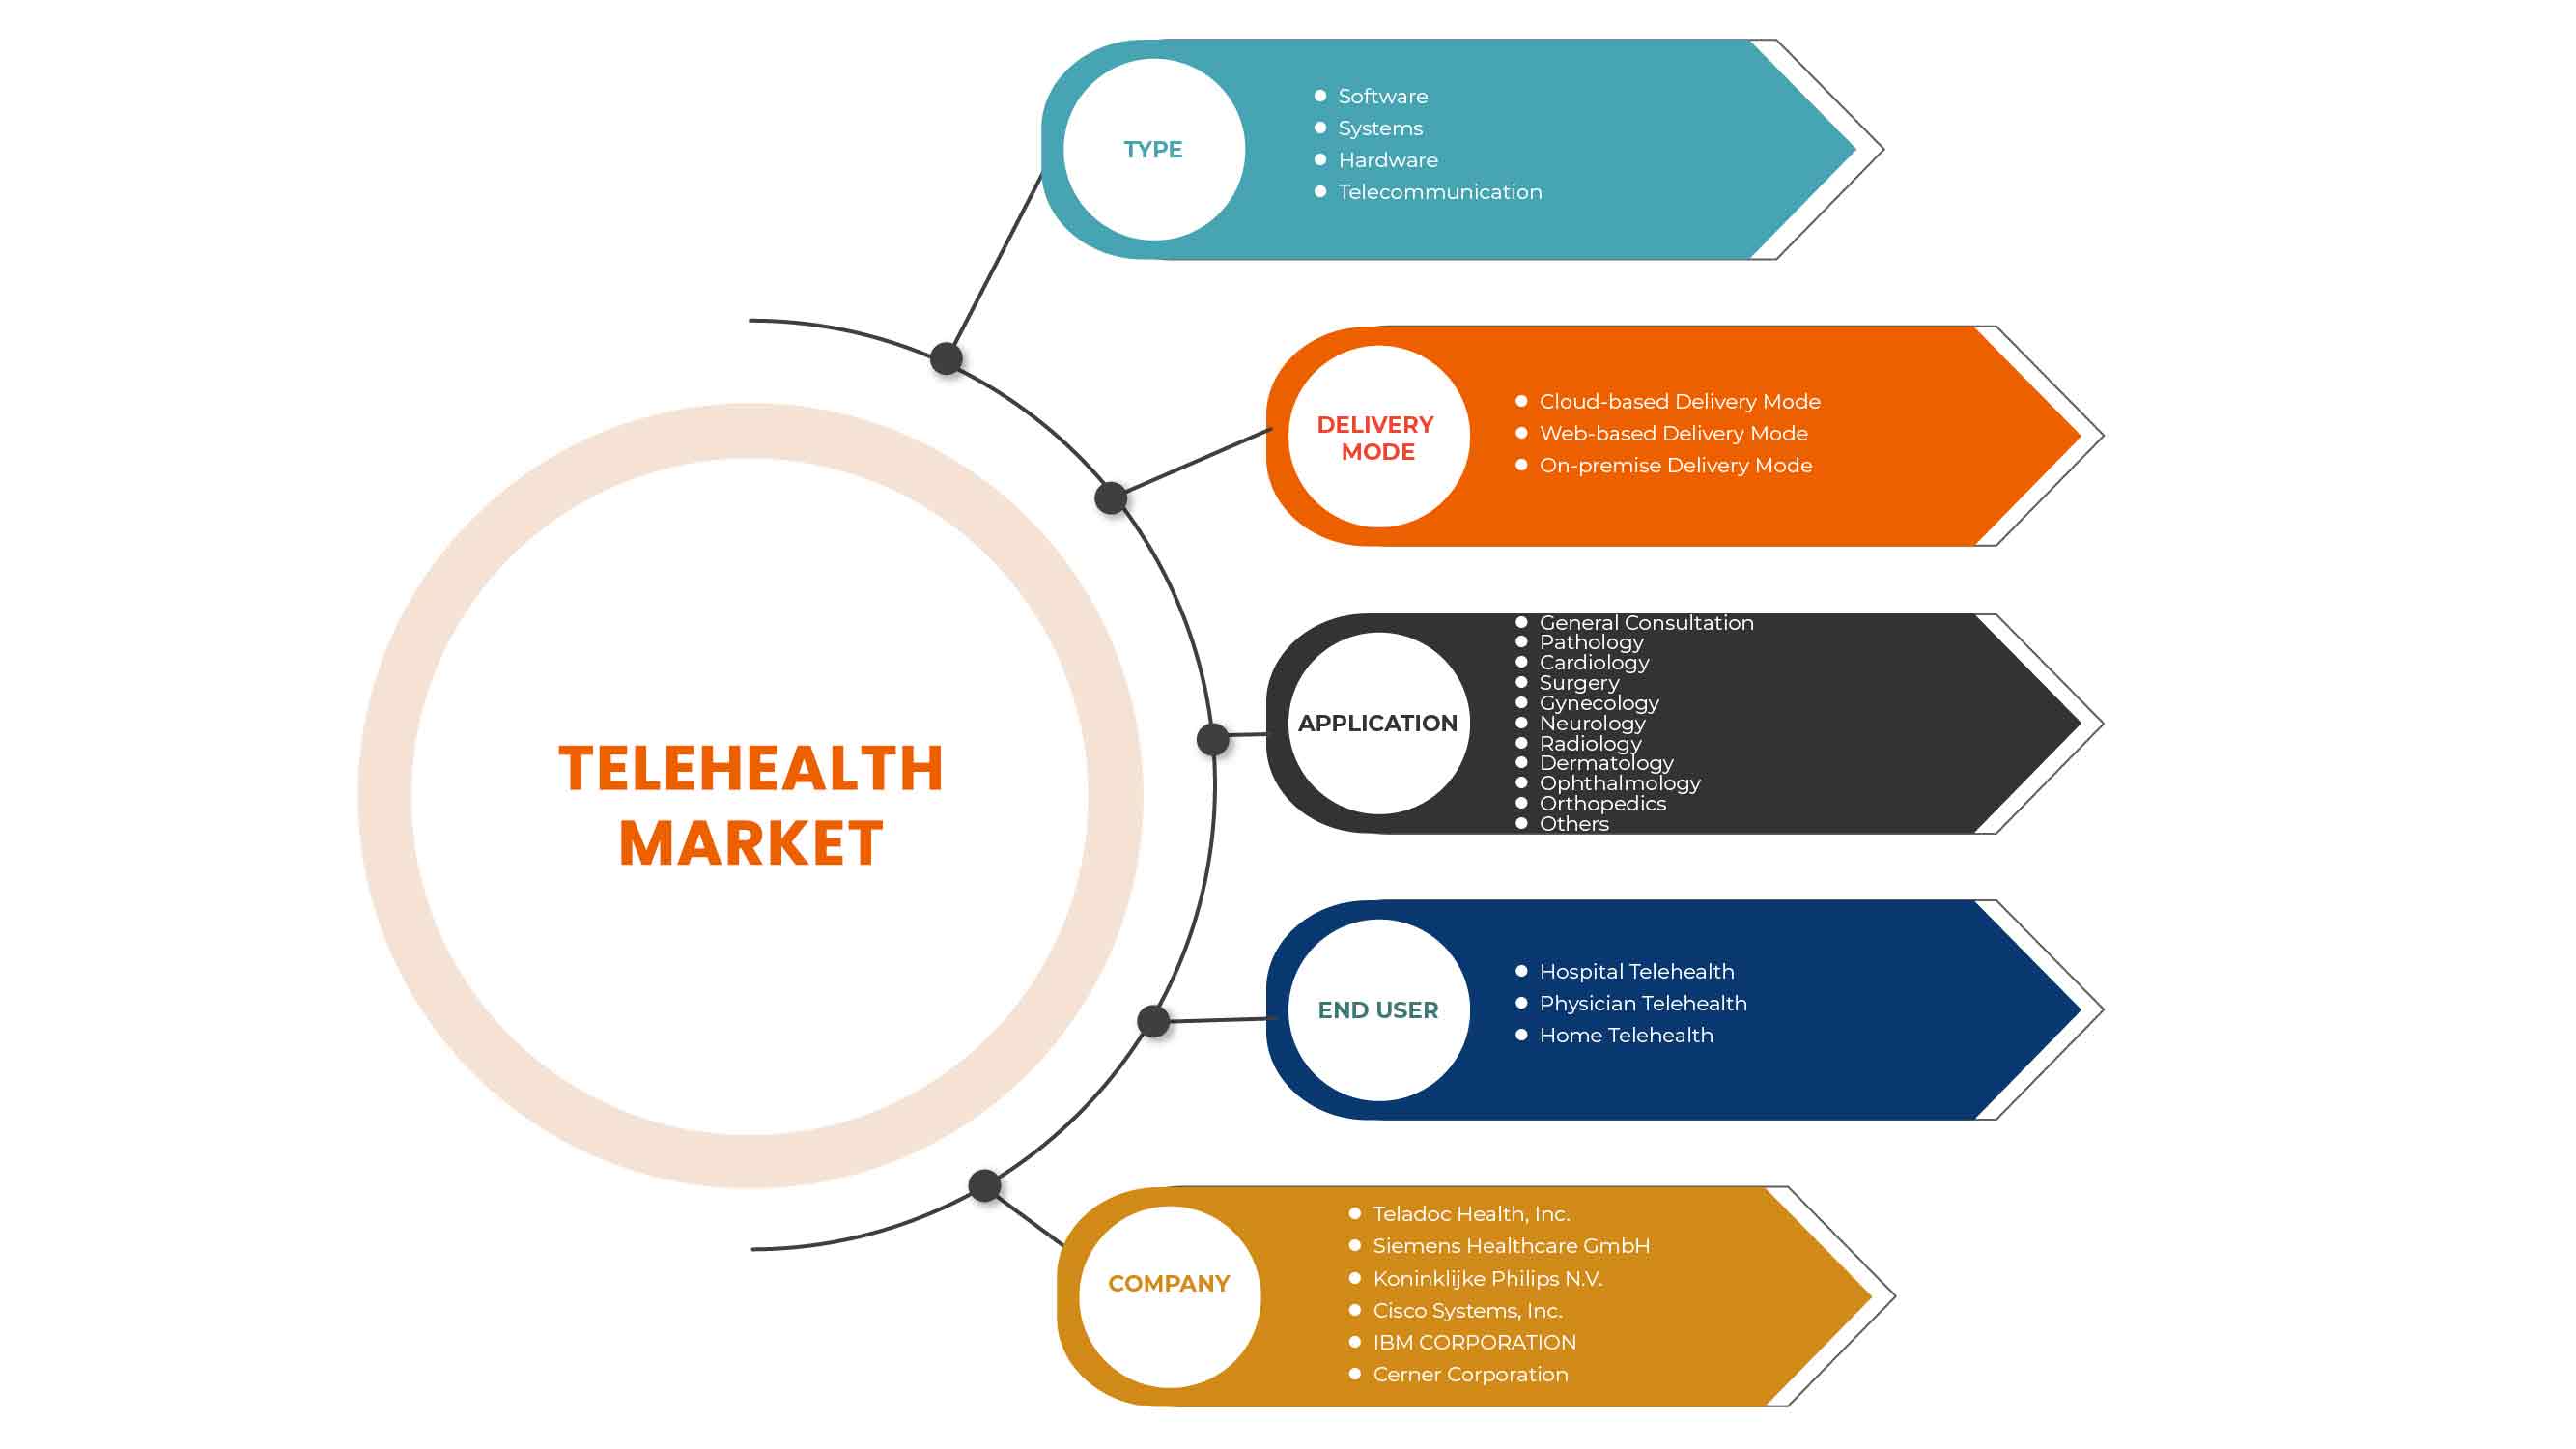 Middle East and Africa Telehealth Market